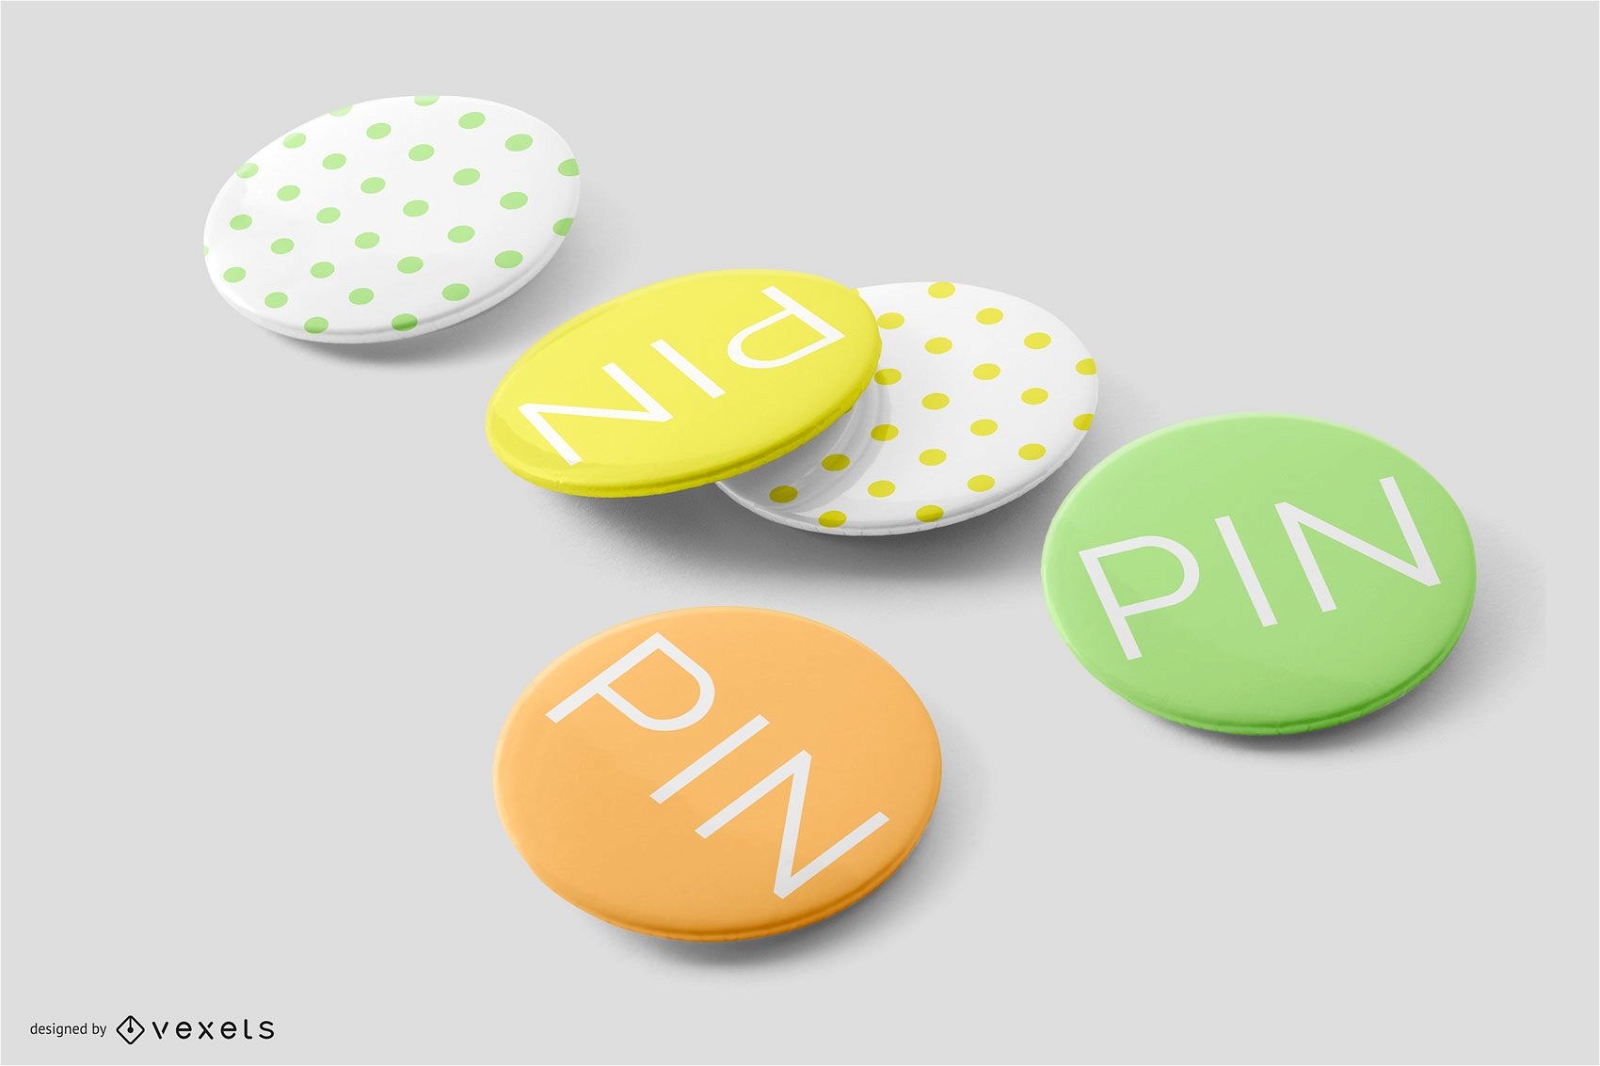 Pin Set Object Mockup Composition